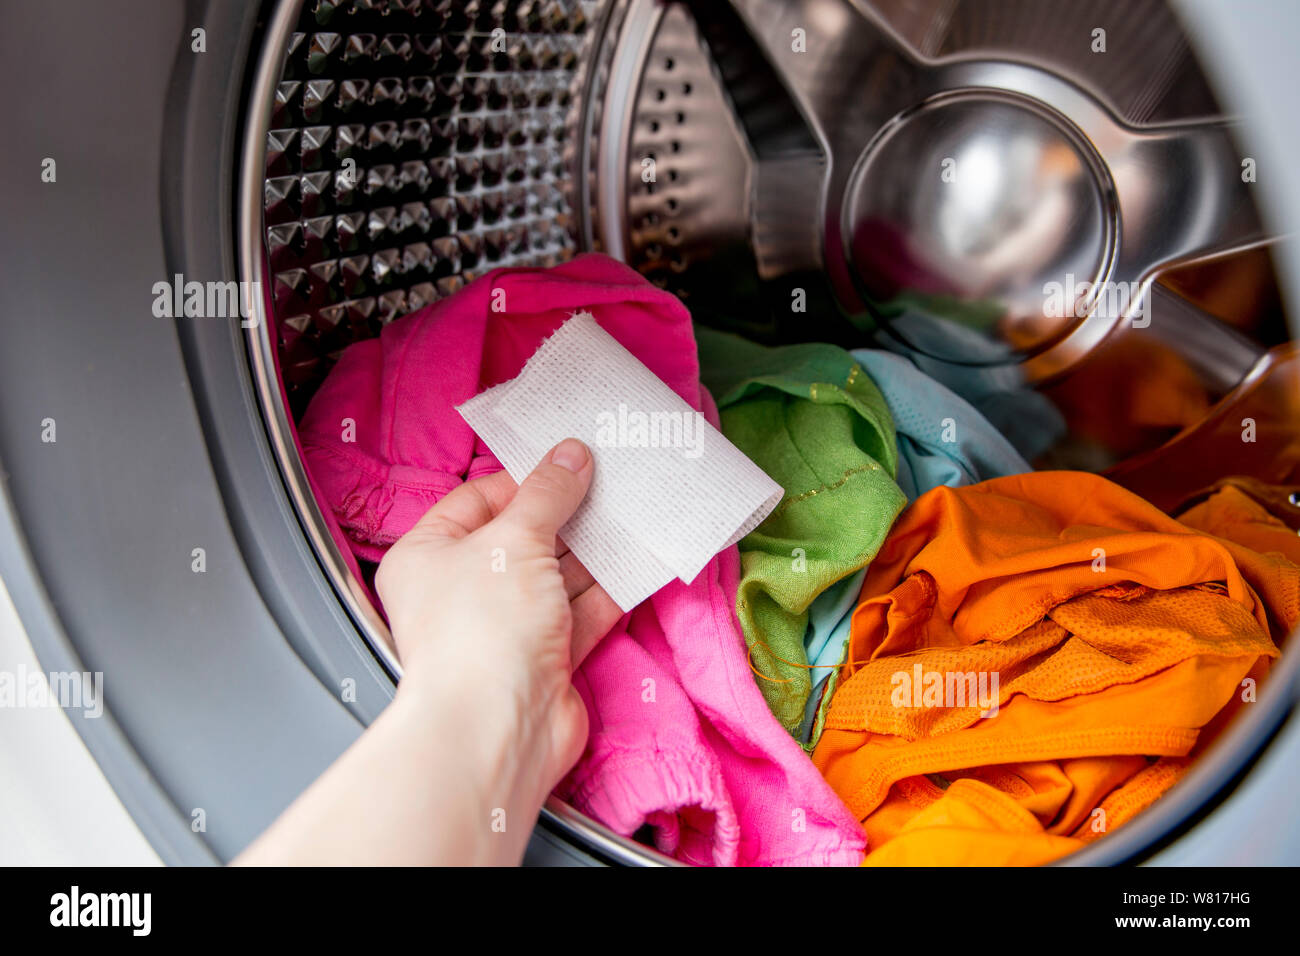 Woman hand put color absorbing sheet inside a washing machine, allows to wash mixed color clothes without ruining colors concept. Stock Photo